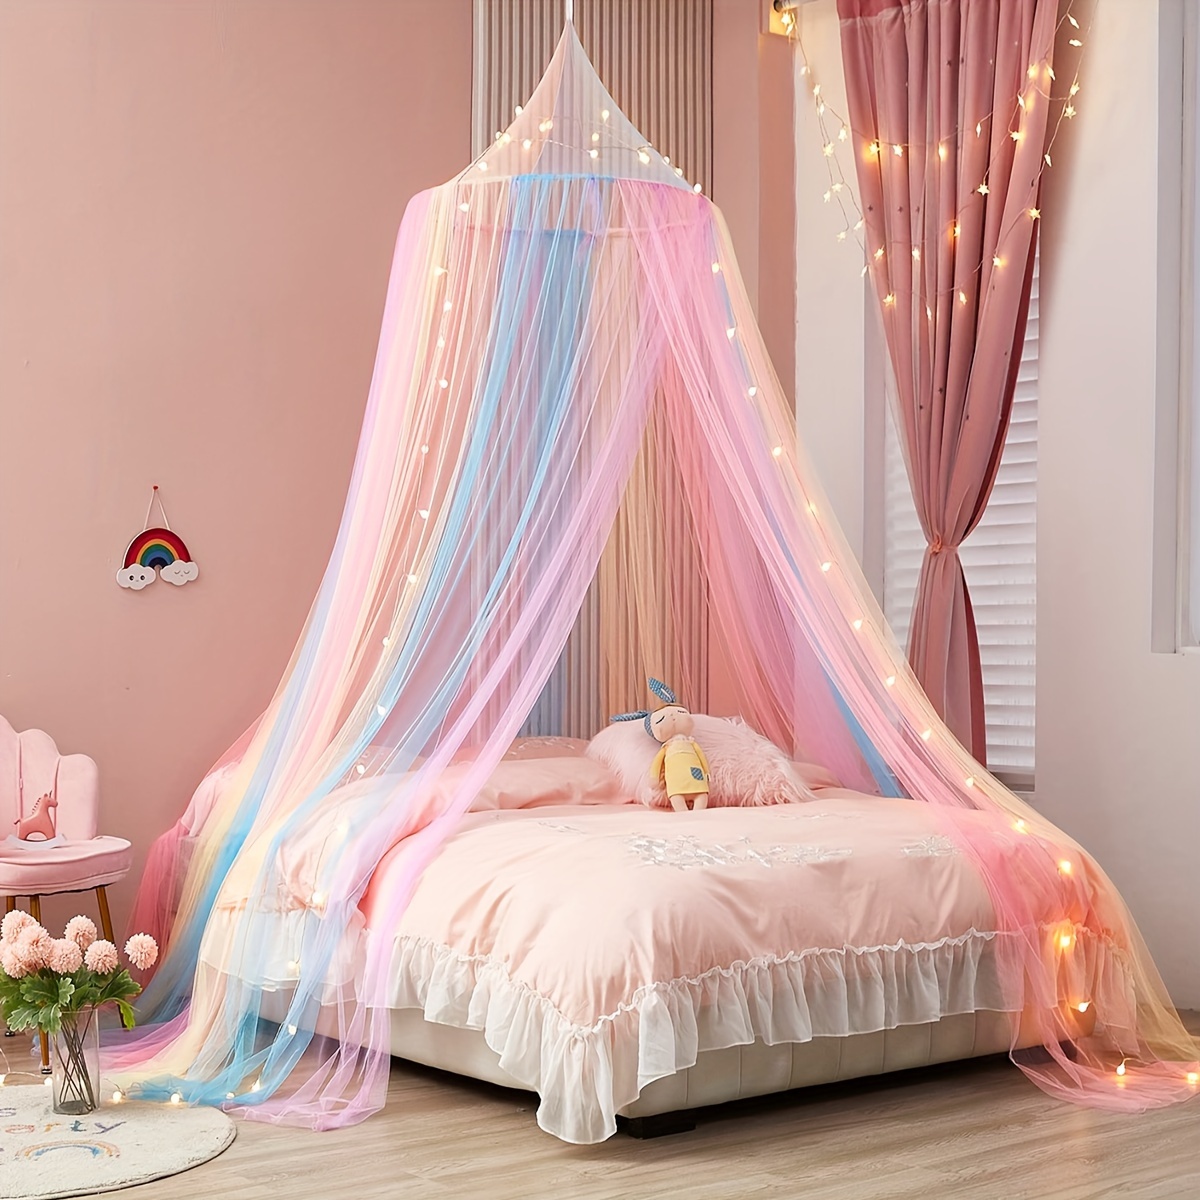 

Princess-themed Double Canopy Bed With Mosquito Net - Lace Trim, Polyester, Hand Wash Only - Perfect For Girls' Room